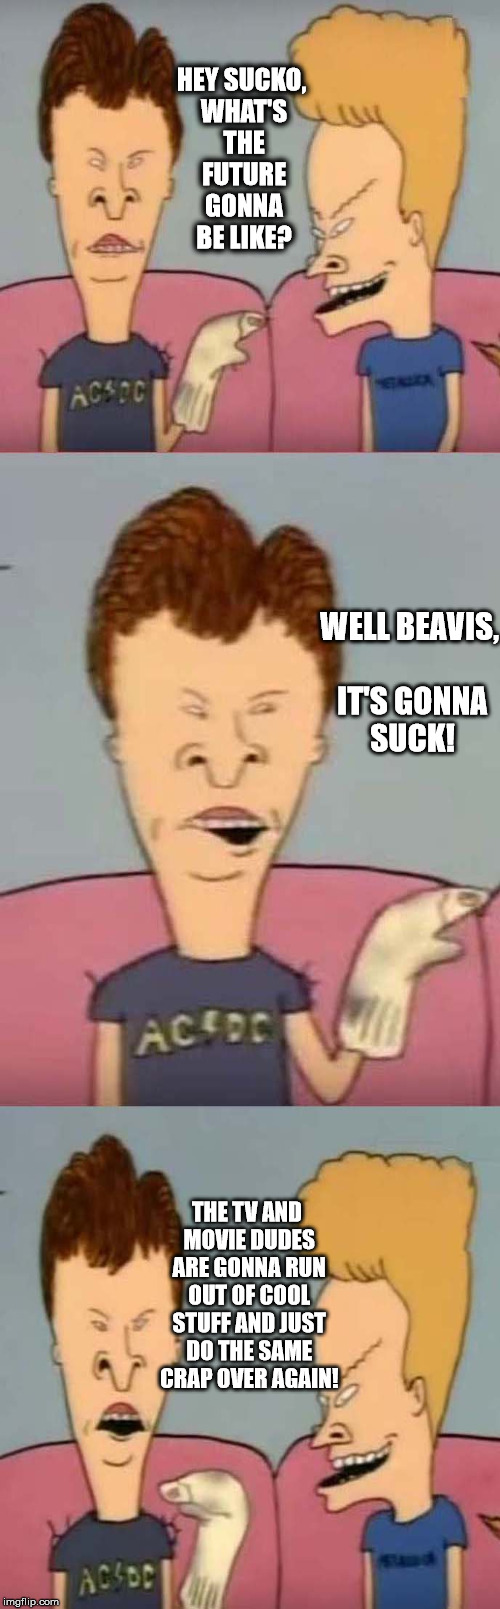 Beavis Future | HEY SUCKO, WHAT'S THE FUTURE GONNA BE LIKE? WELL BEAVIS, IT'S GONNA SUCK! THE TV AND MOVIE DUDES ARE GONNA RUN OUT OF COOL STUFF AND JUST DO THE SAME CRAP OVER AGAIN! | image tagged in beavis and butthead,future,sleep deprivation creations | made w/ Imgflip meme maker